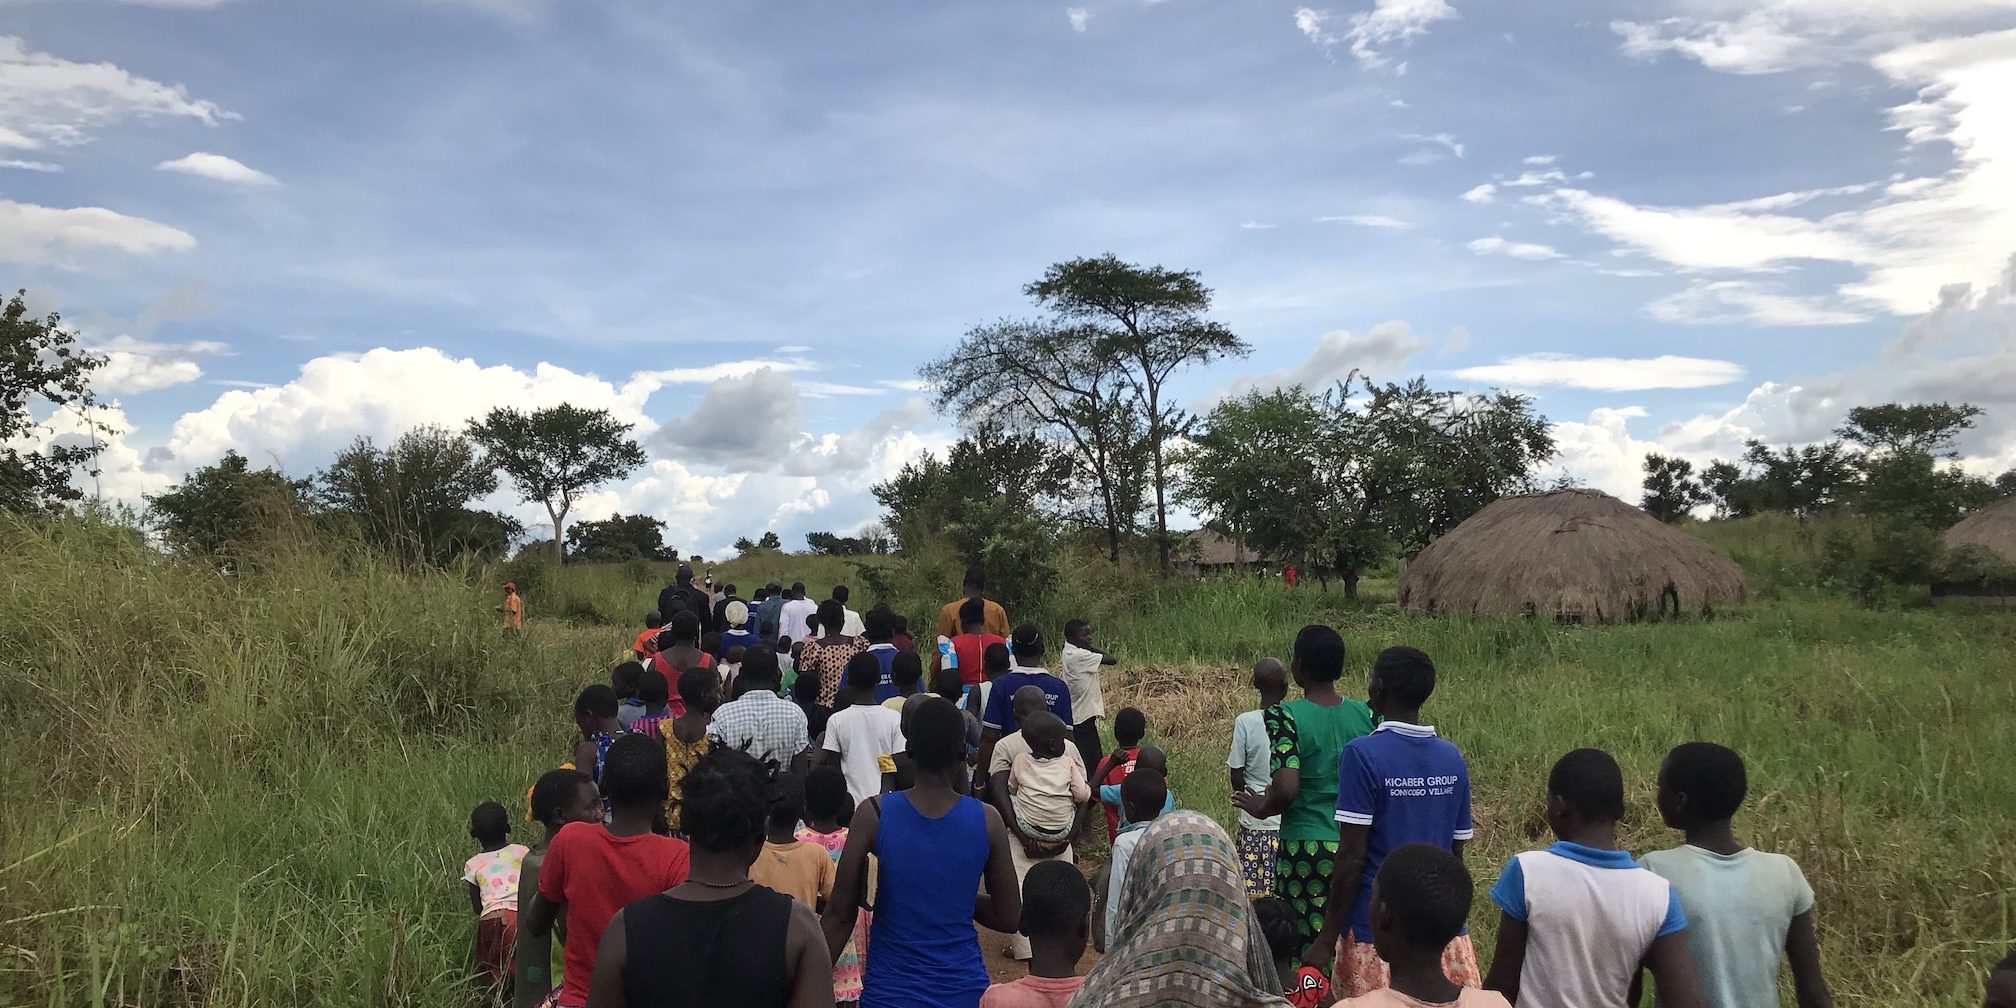 The people of the villages gather to walk to the new clean water well.